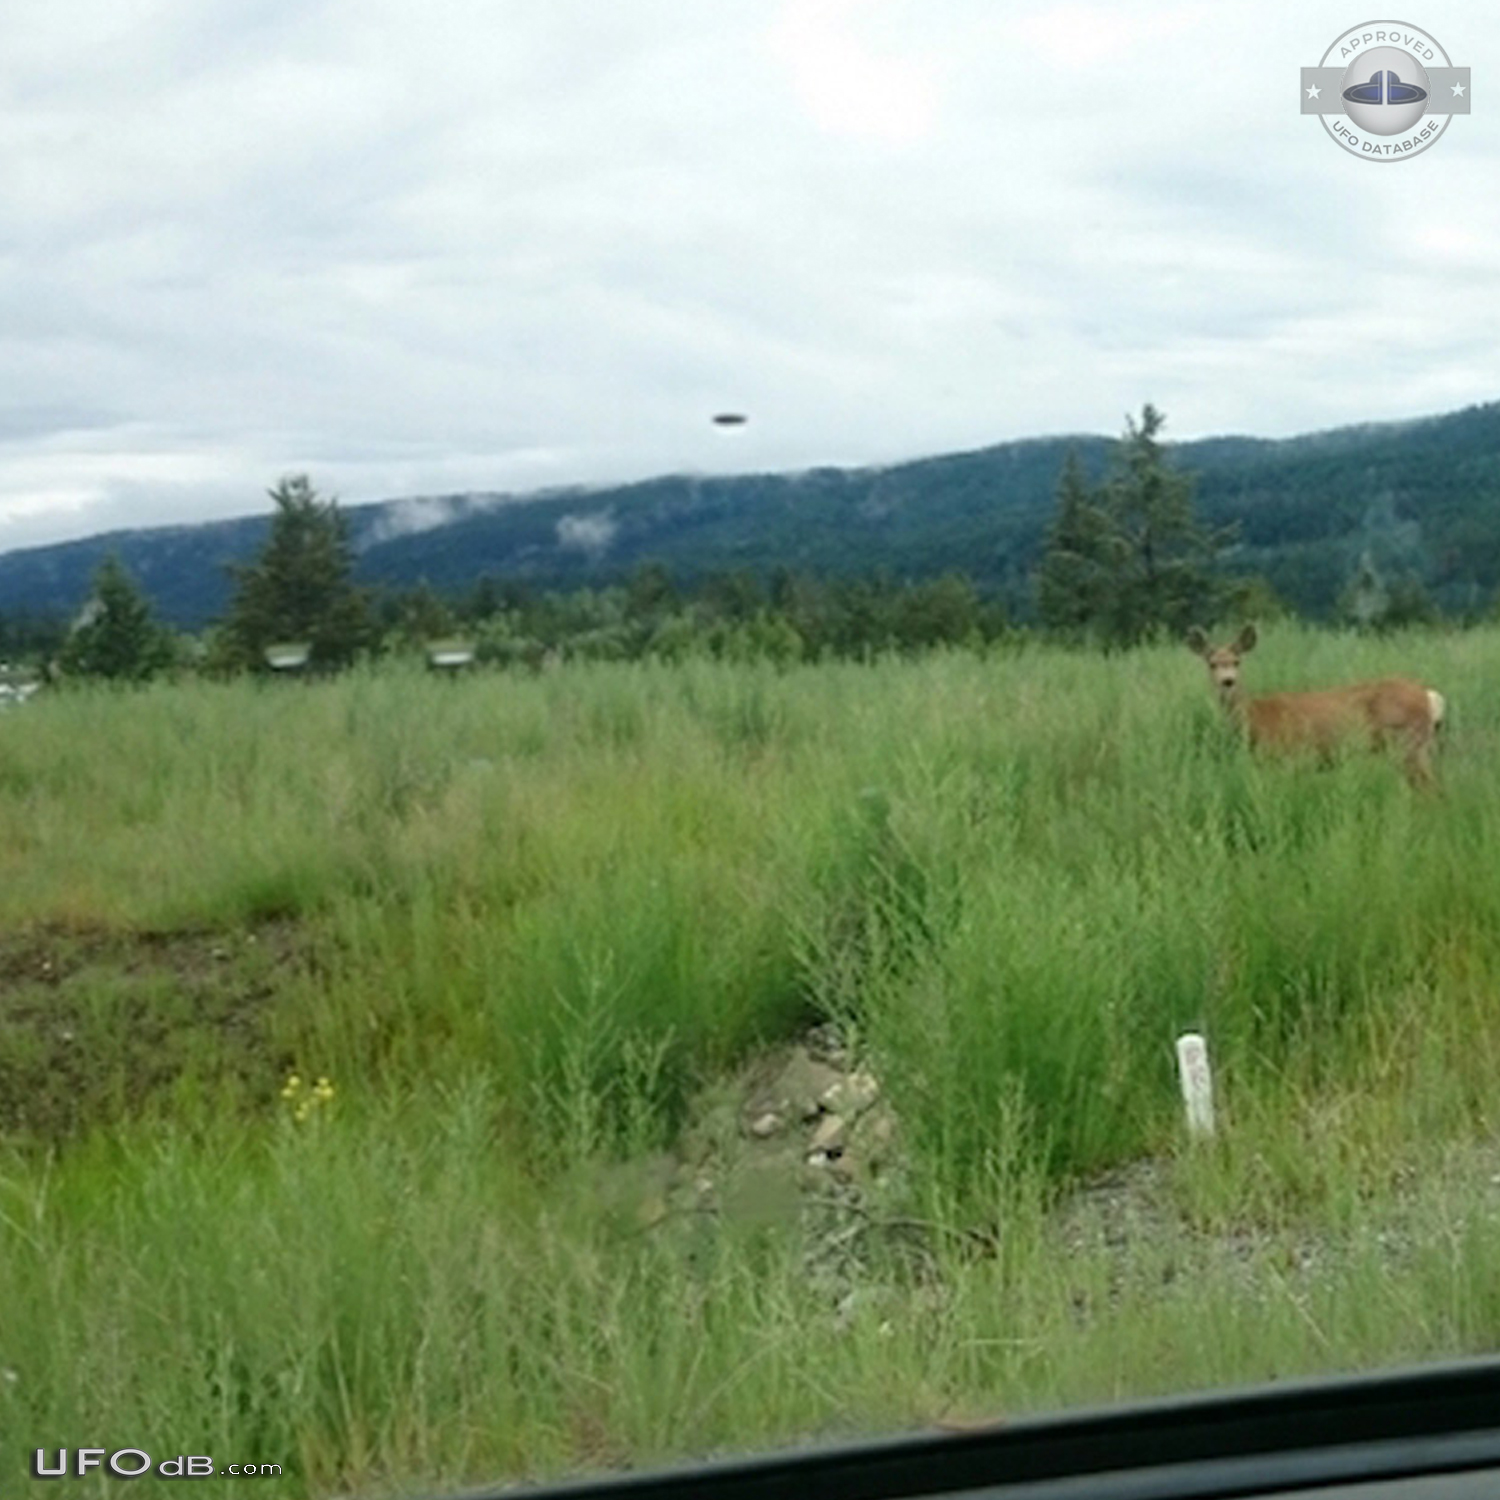 Deer picture gets a UFO passing by near Logan Lake British Columbia Ca UFO Picture #844-2